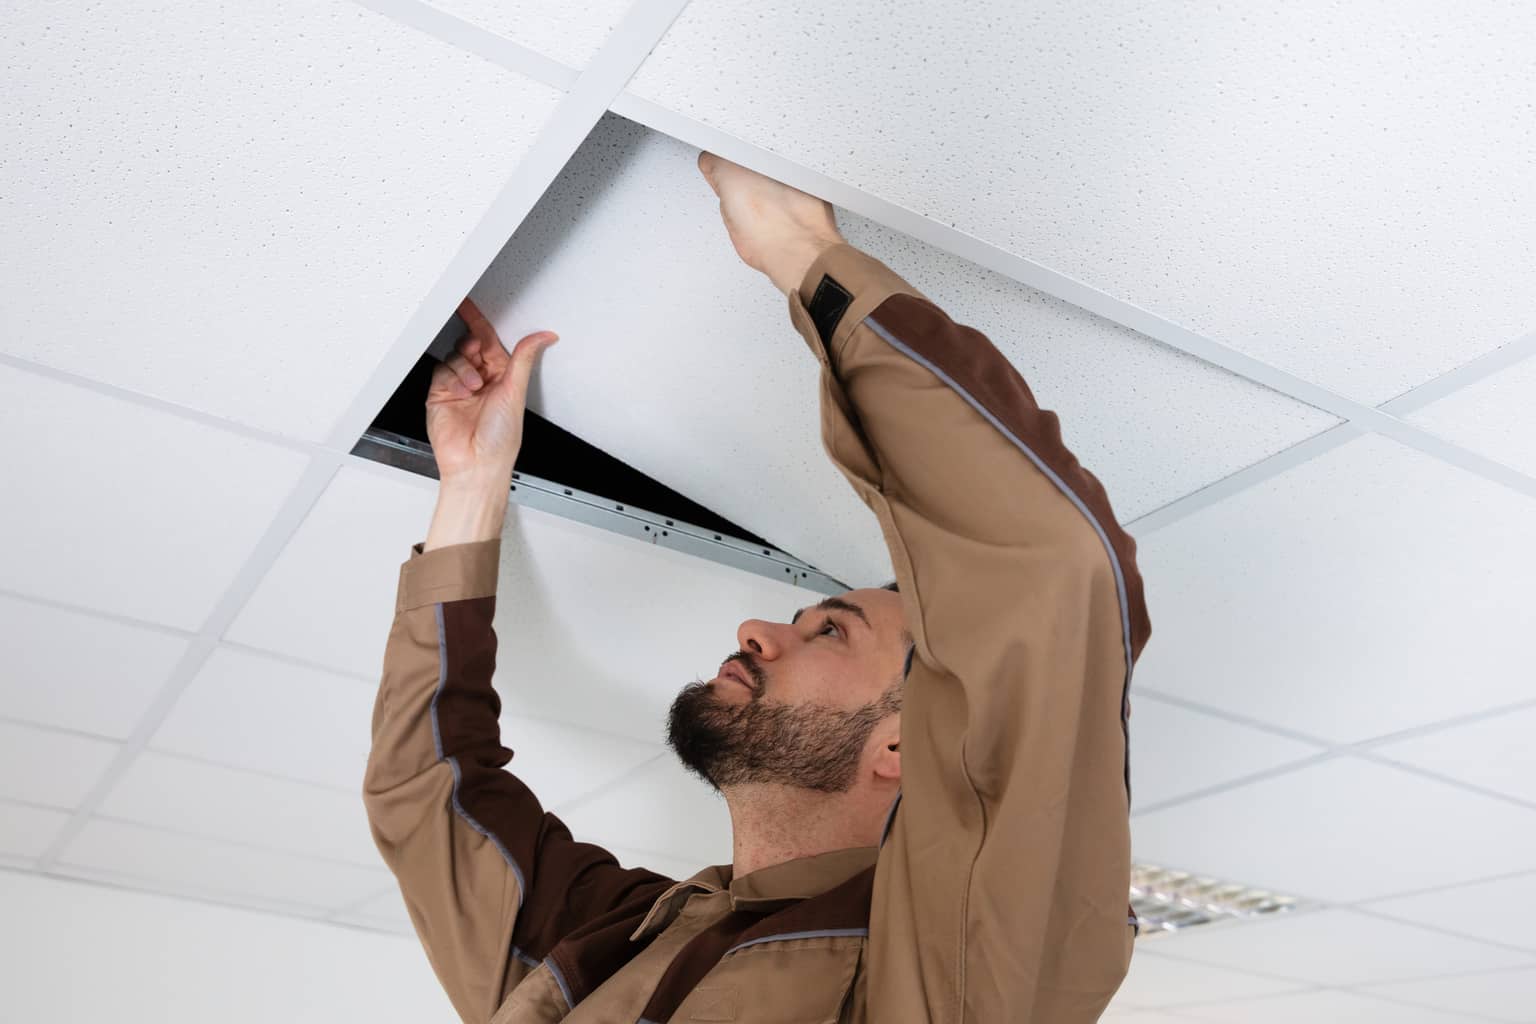 How To Install Surface Mount Ceiling Tiles How to Install Ceiling Tiles Without Breaking Them